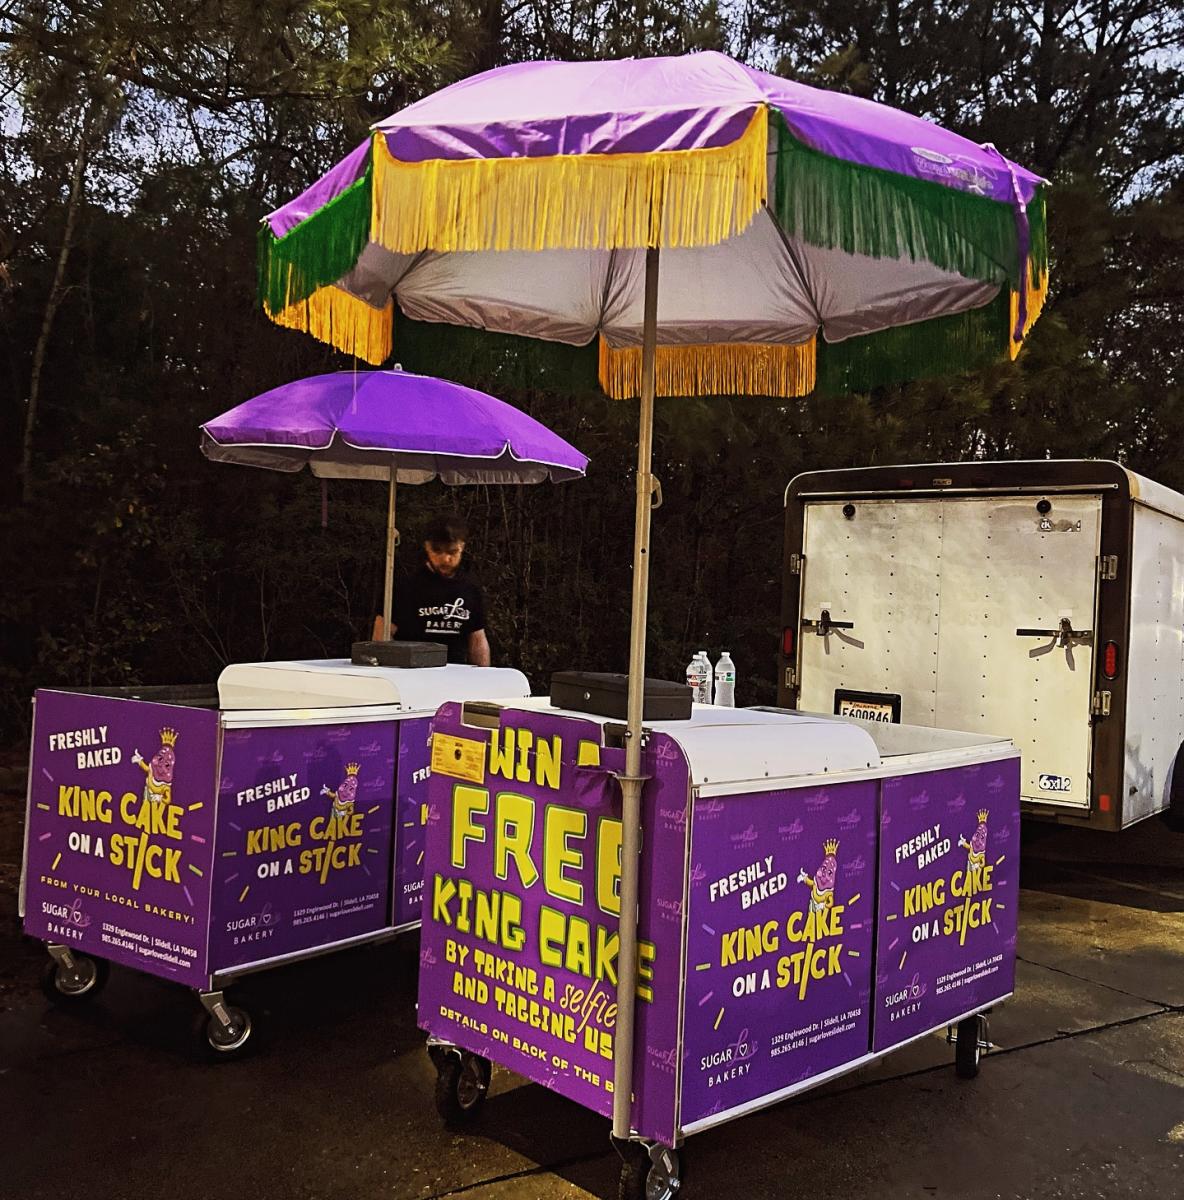 Sugar Love Bakery brings its King Cake on a Stick to the parade route with its mobile cart.